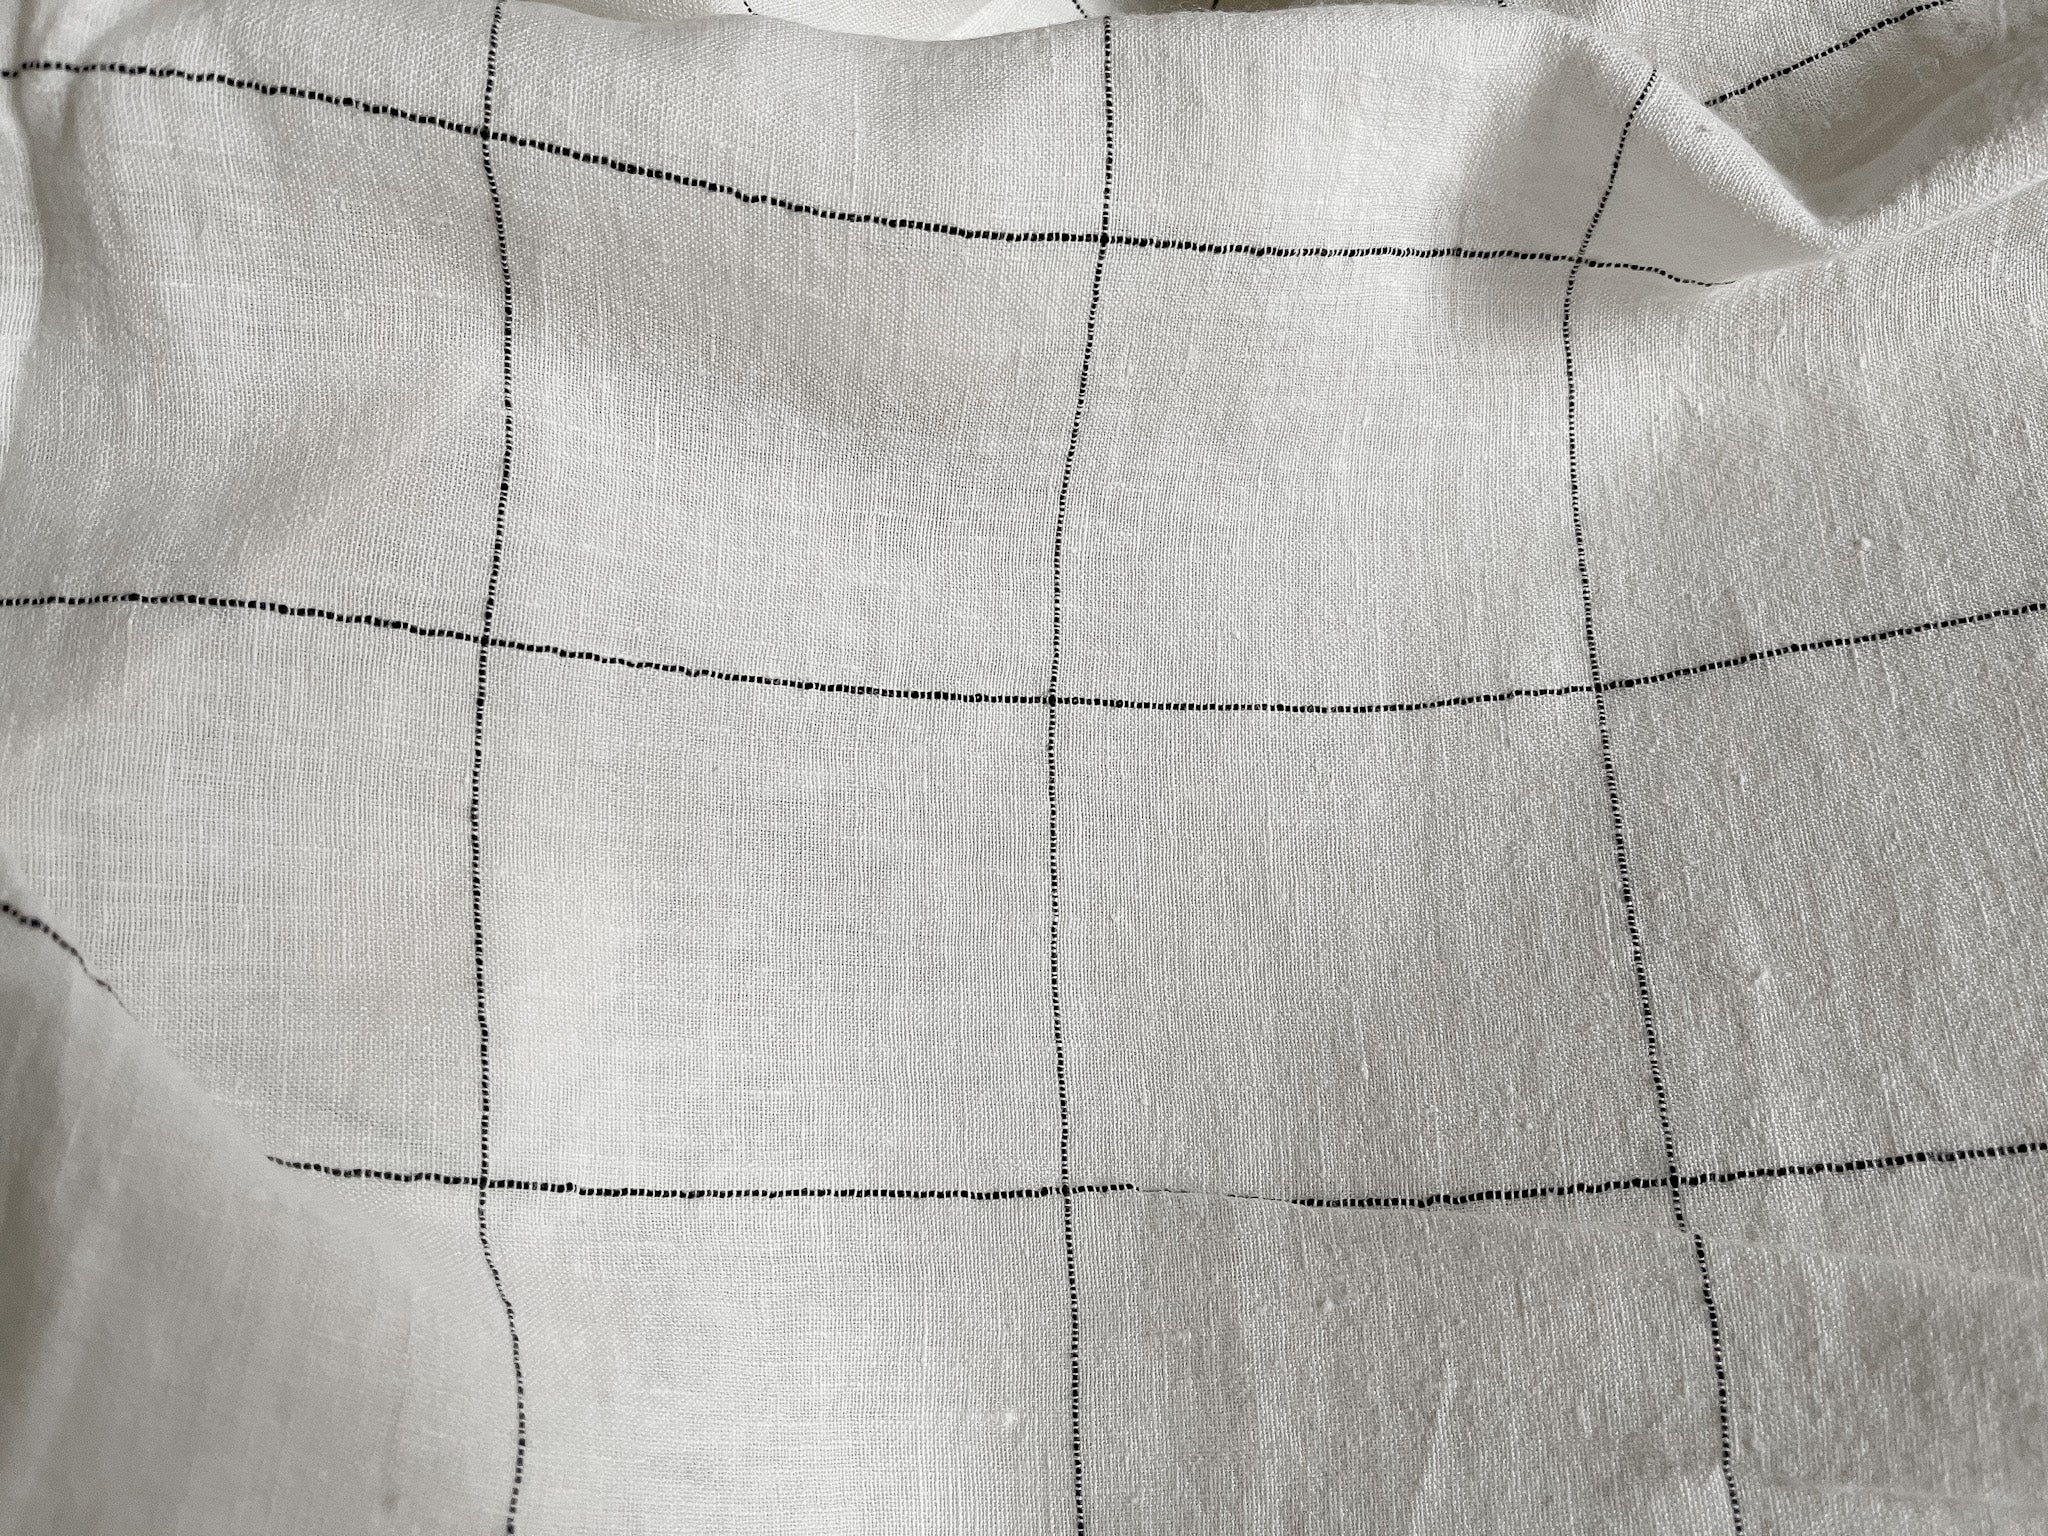 Ivory and Black Check Linen Fabric - Extra Wide Stone Washed Super Soft